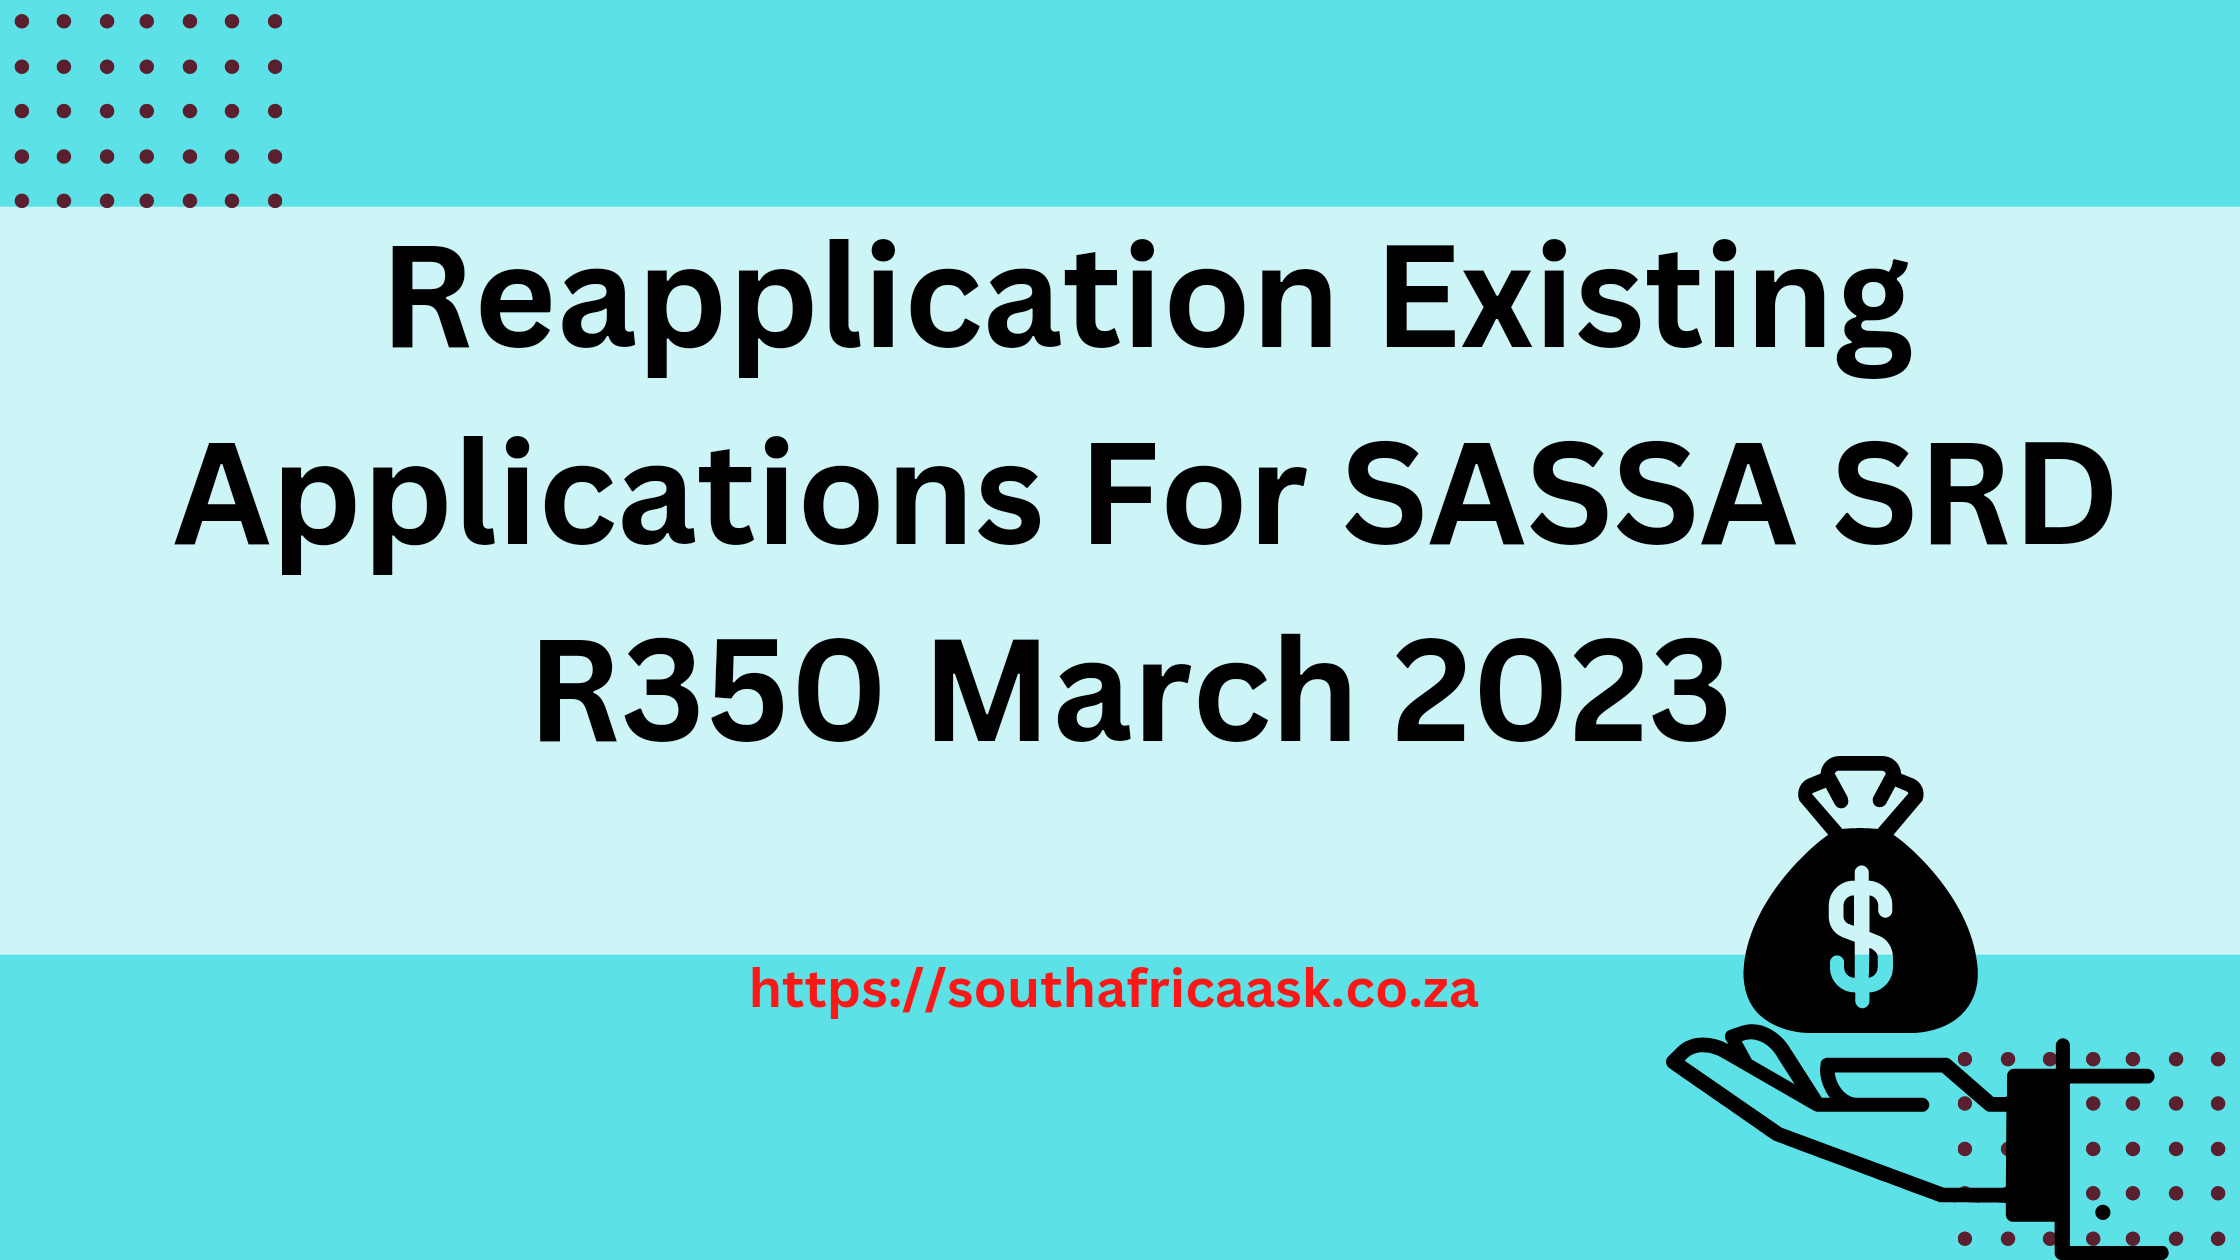 Reapplication Existing Applications For SASSA SRD R350 March 2023